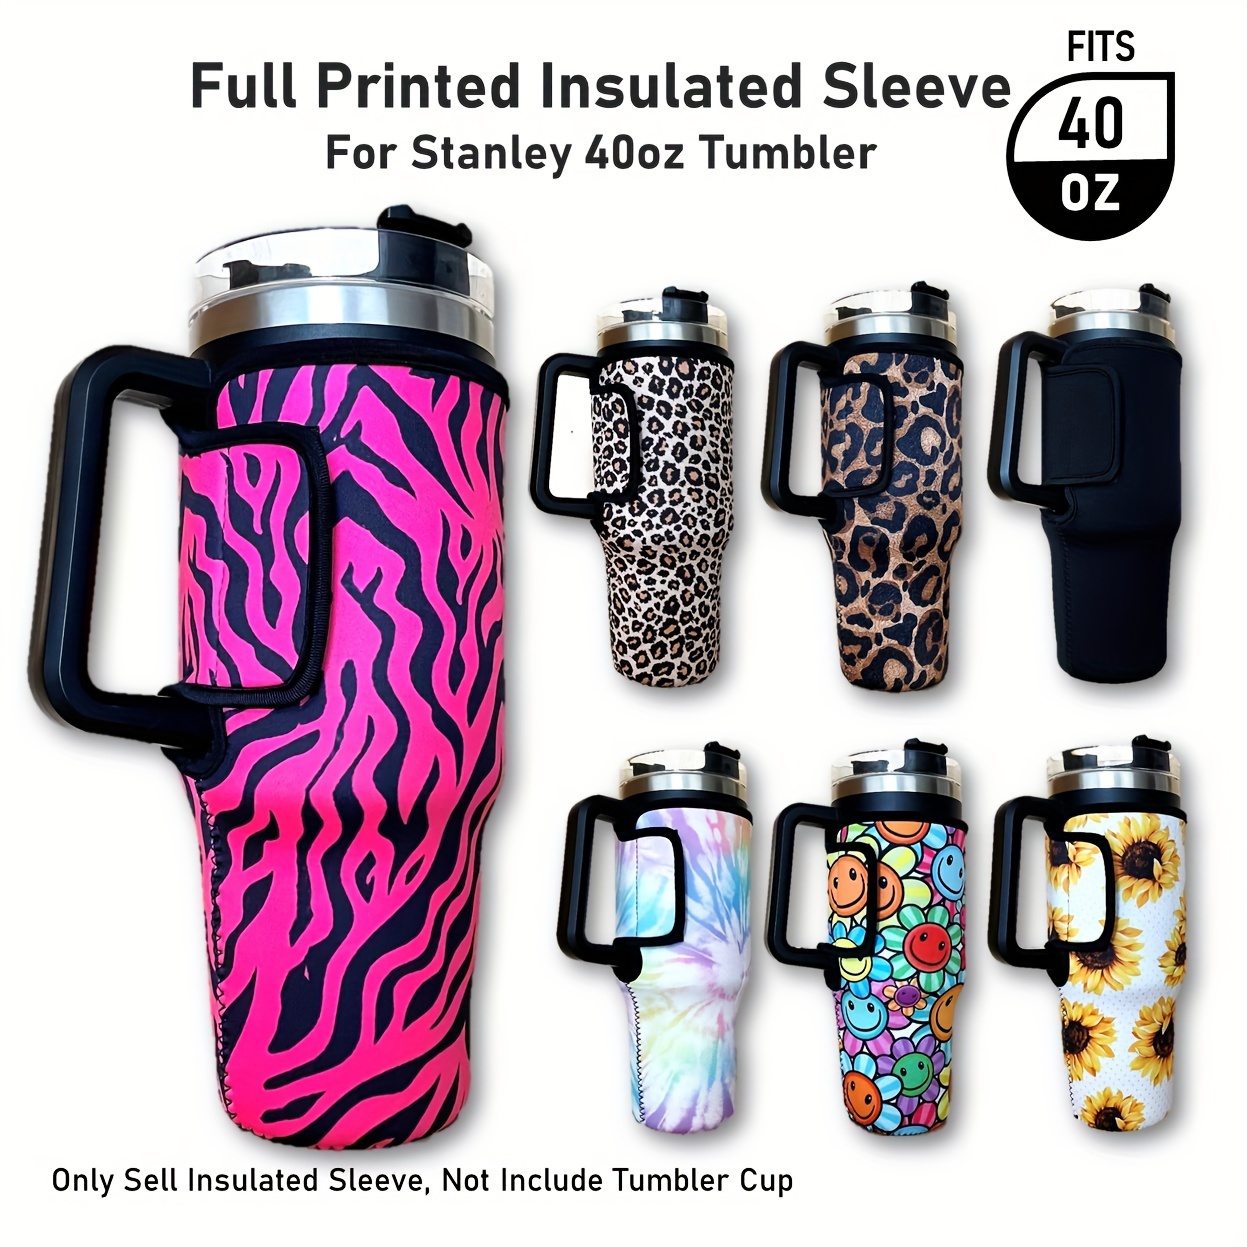 

1pc Funny Printed Cup, Insulated Sleeve For 40oz/1200ml Tumbler Cup, Reusable Water Bottle Protective Cover, Cup Accessories, Suitable For Outdoor Camping, Driving And Traveling